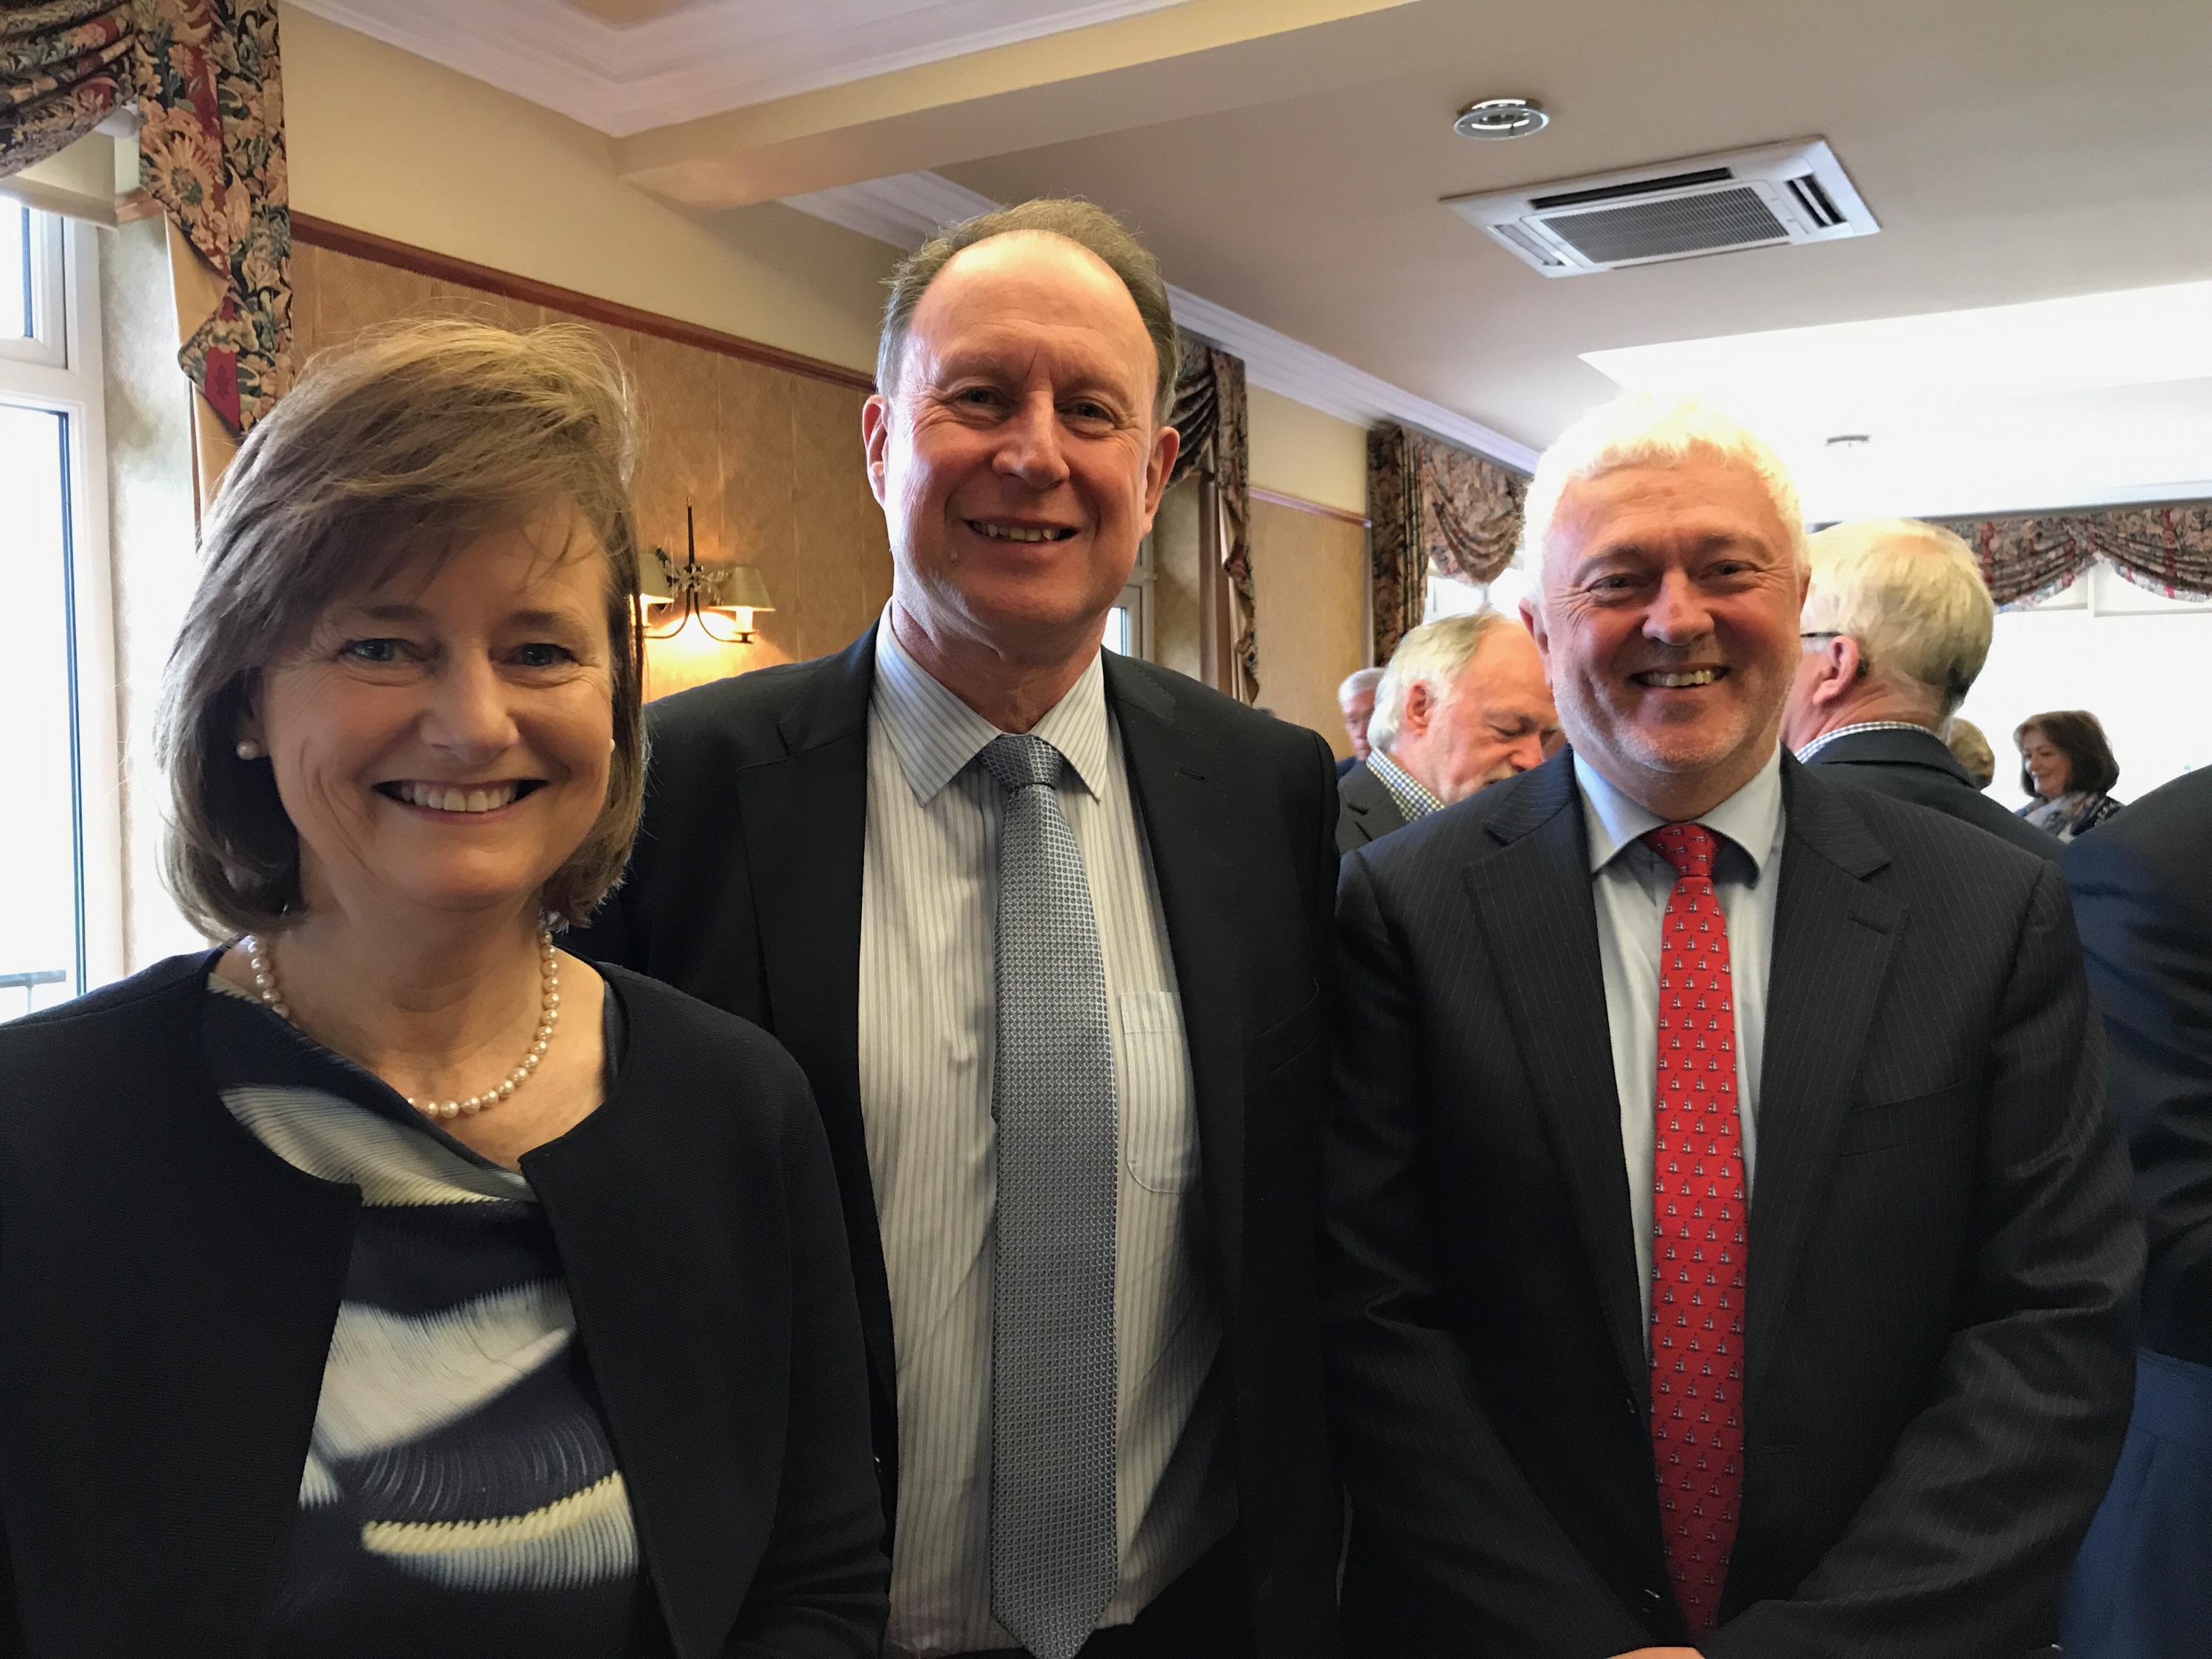 Pictured L-R: Deirdre Clune, Member of the European Parliament; Joe Aherne, CEO Leading Edge Group and Eamonn Siggins, Chief Executive at CPA Ireland.